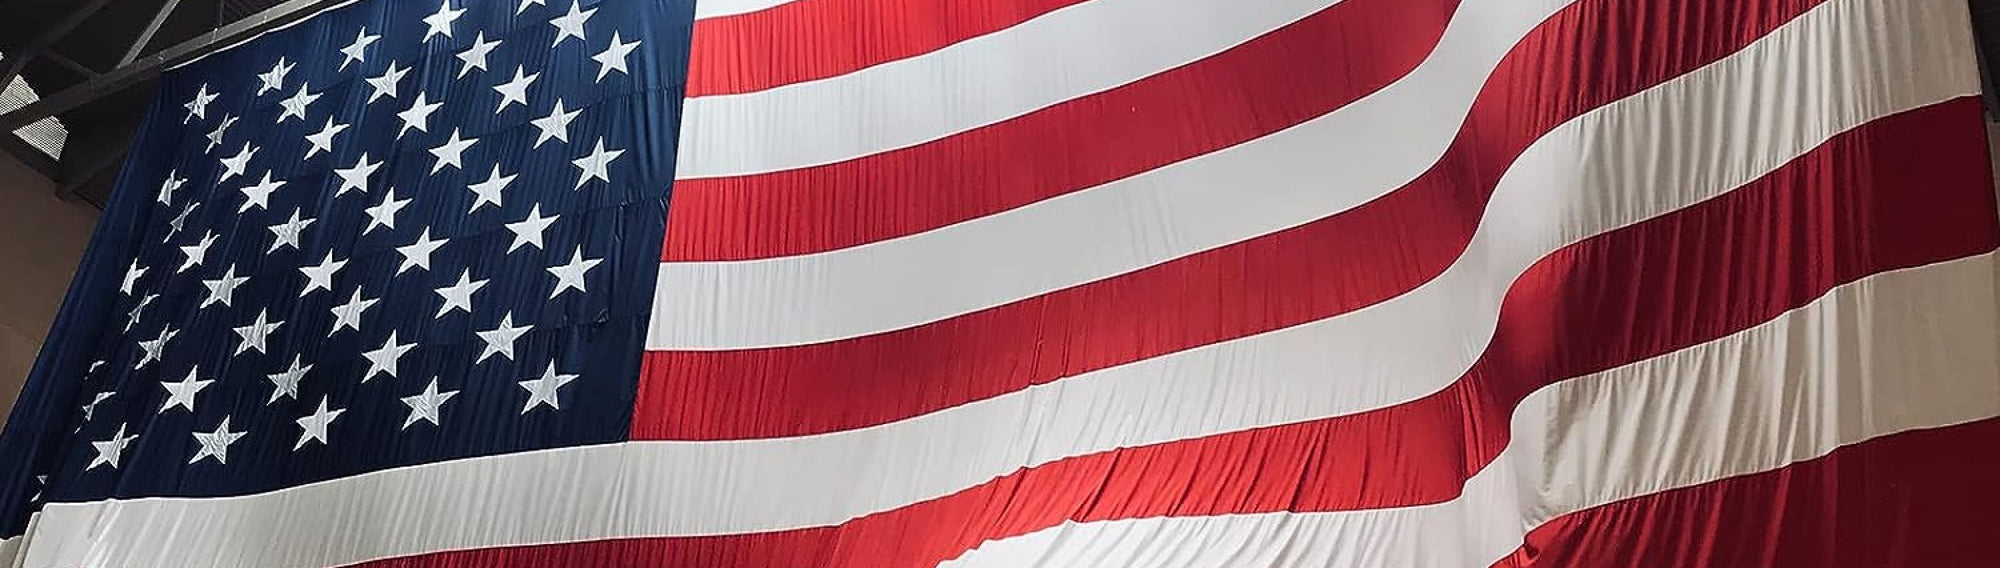 Large American Flags For Sale